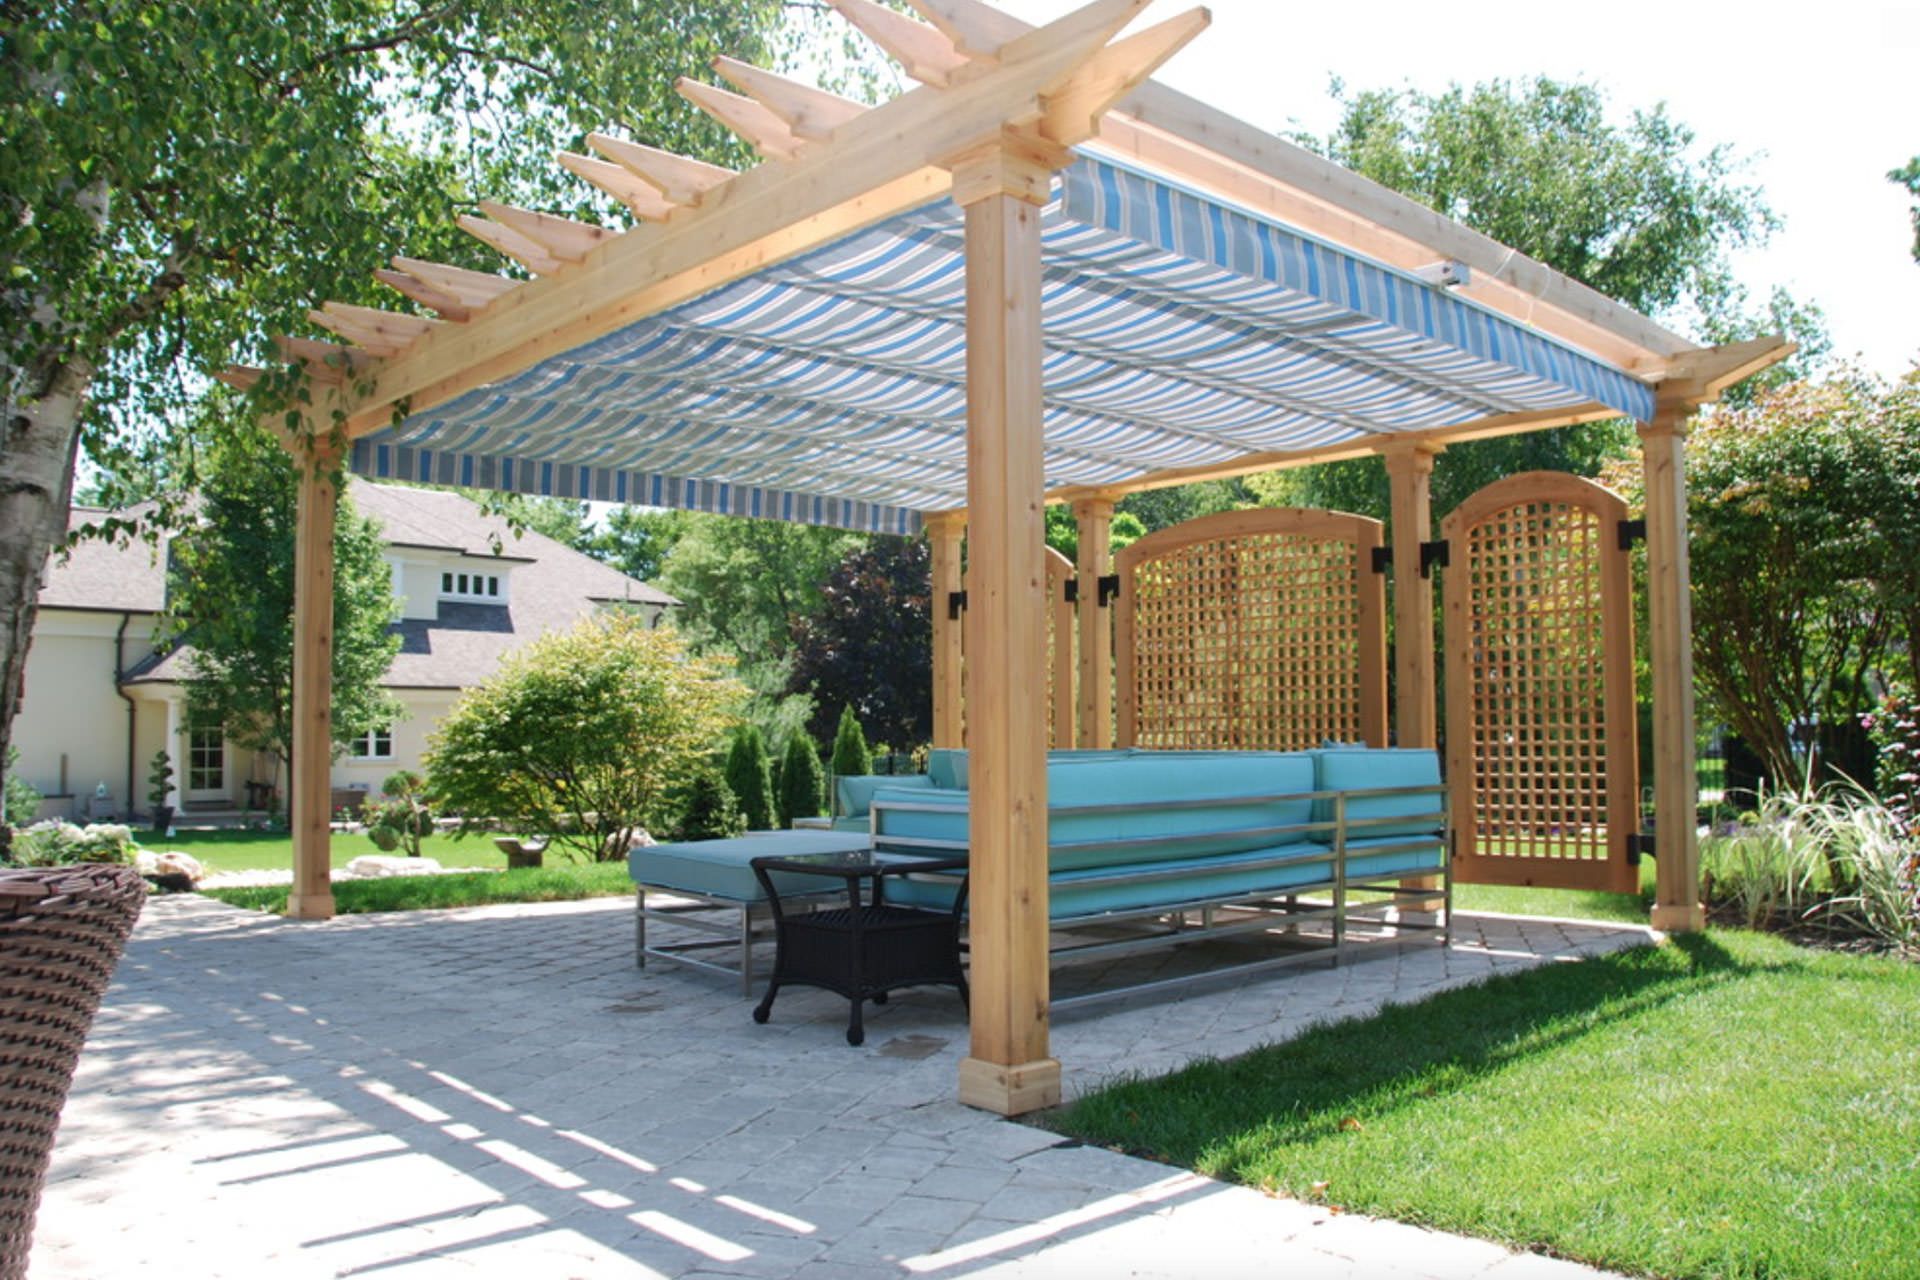 Retractable Canopy or Awning: What's the Difference?